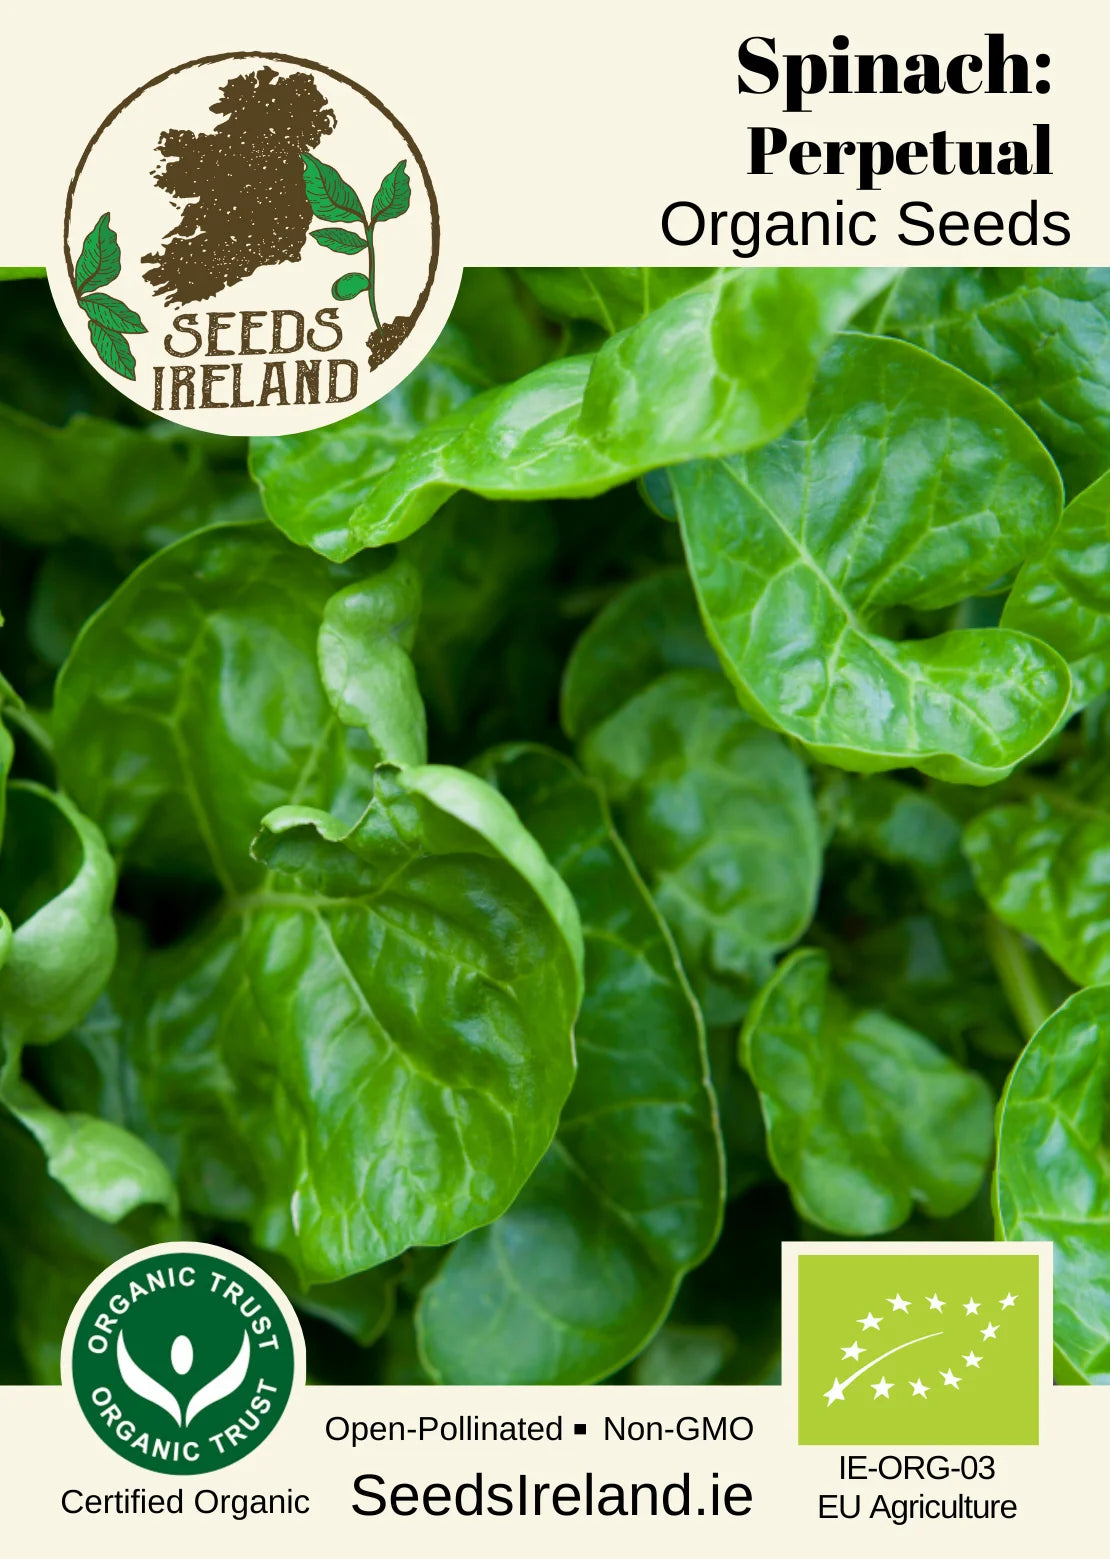 Spinach: Perpetual Organic Seed